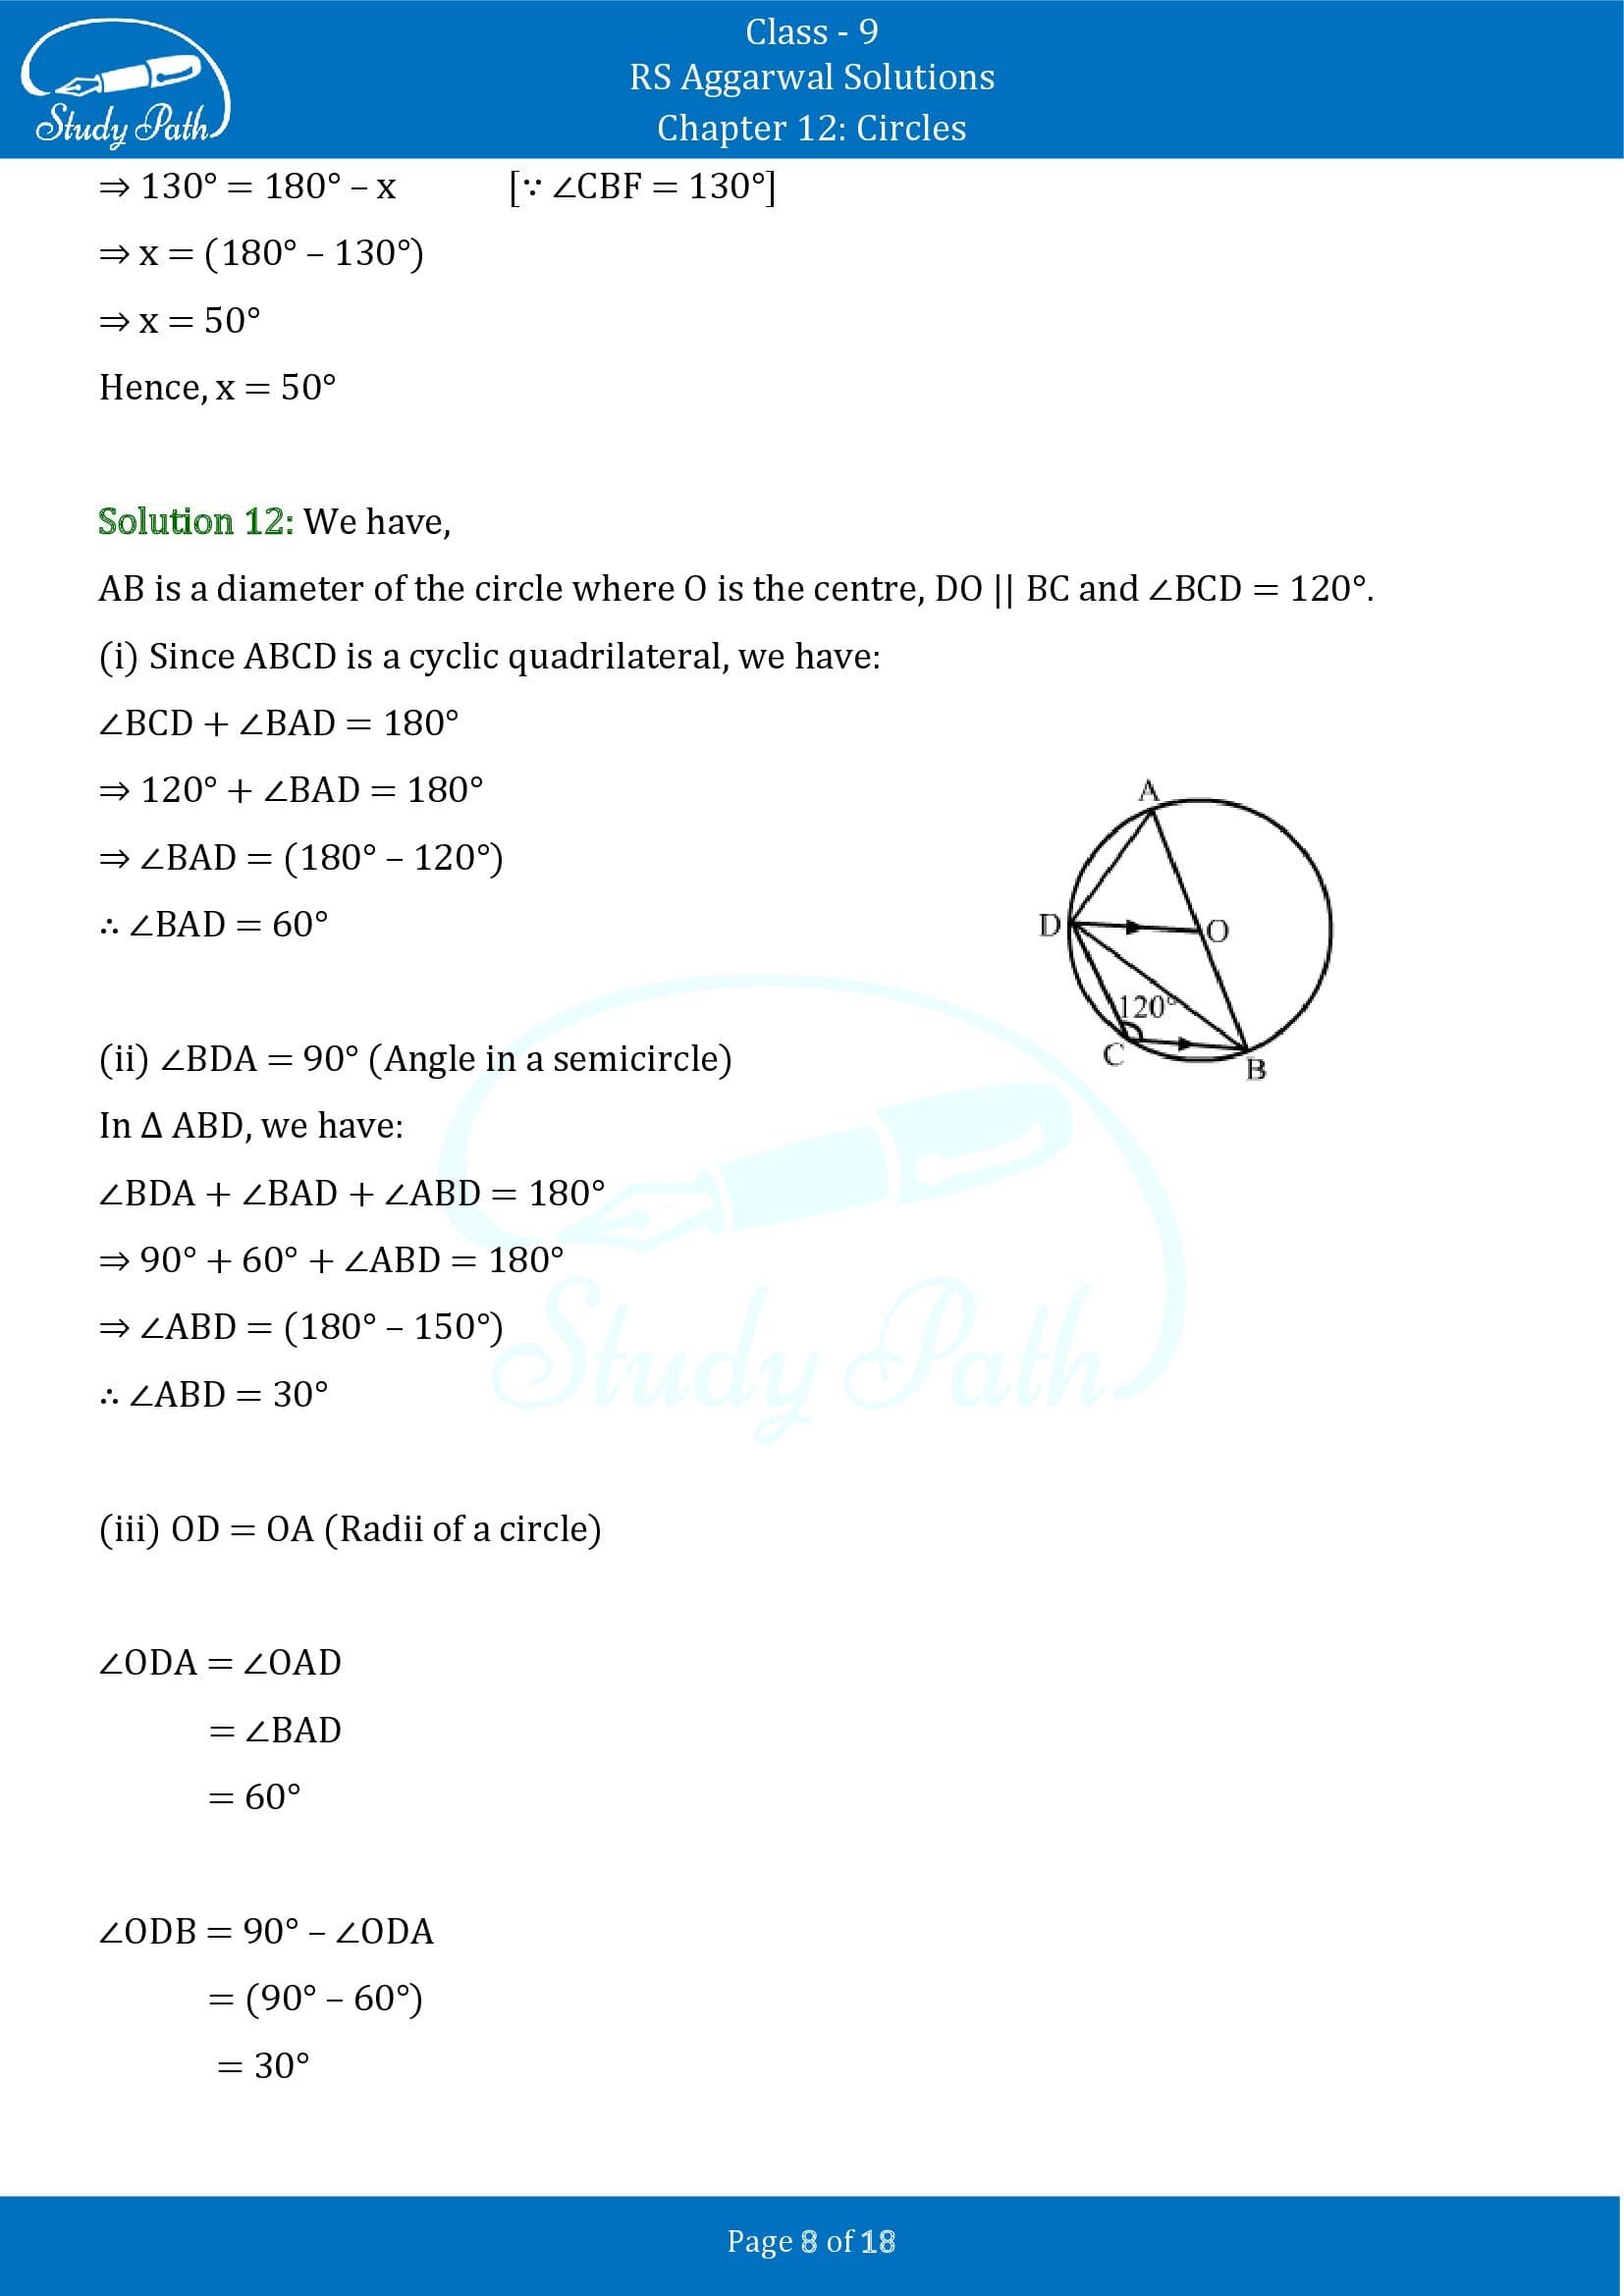 RS Aggarwal Solutions Class 9 Chapter 12 Circles Exercise 12C 00008